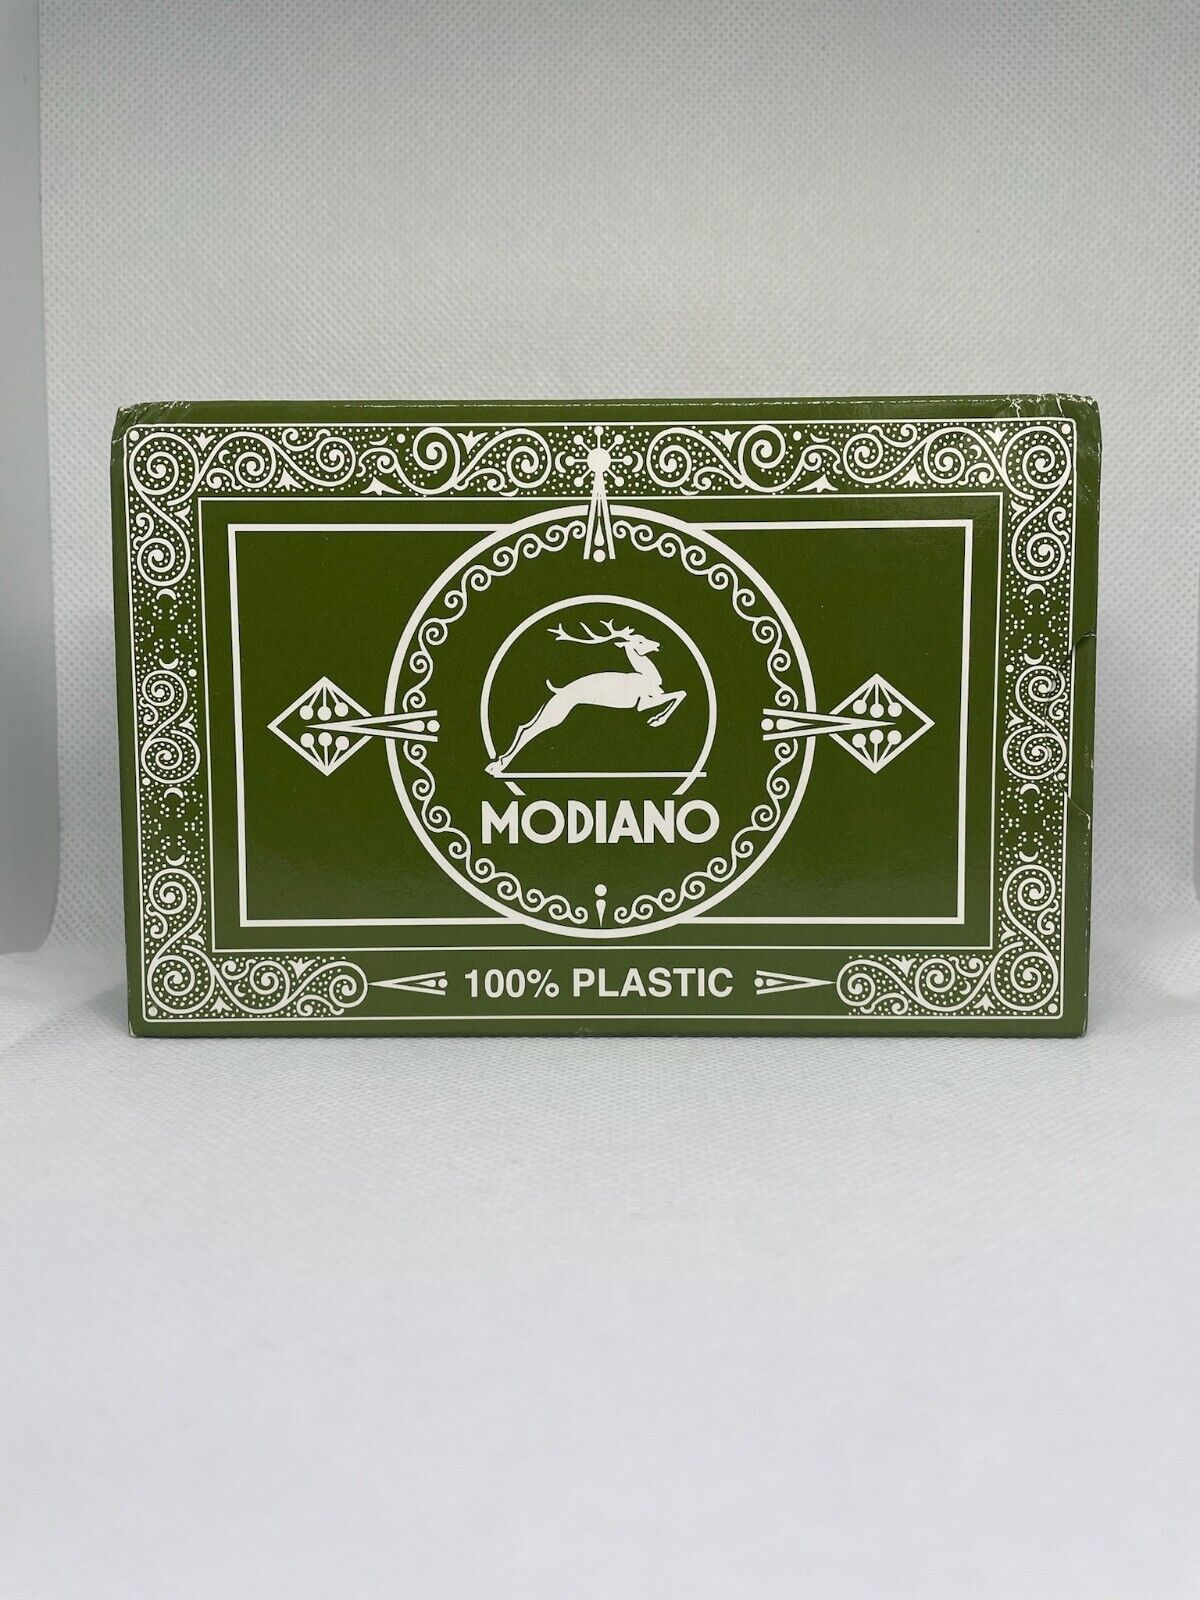 Modiano Club Poker Playing Card Decks with Plastic Case - Sealed